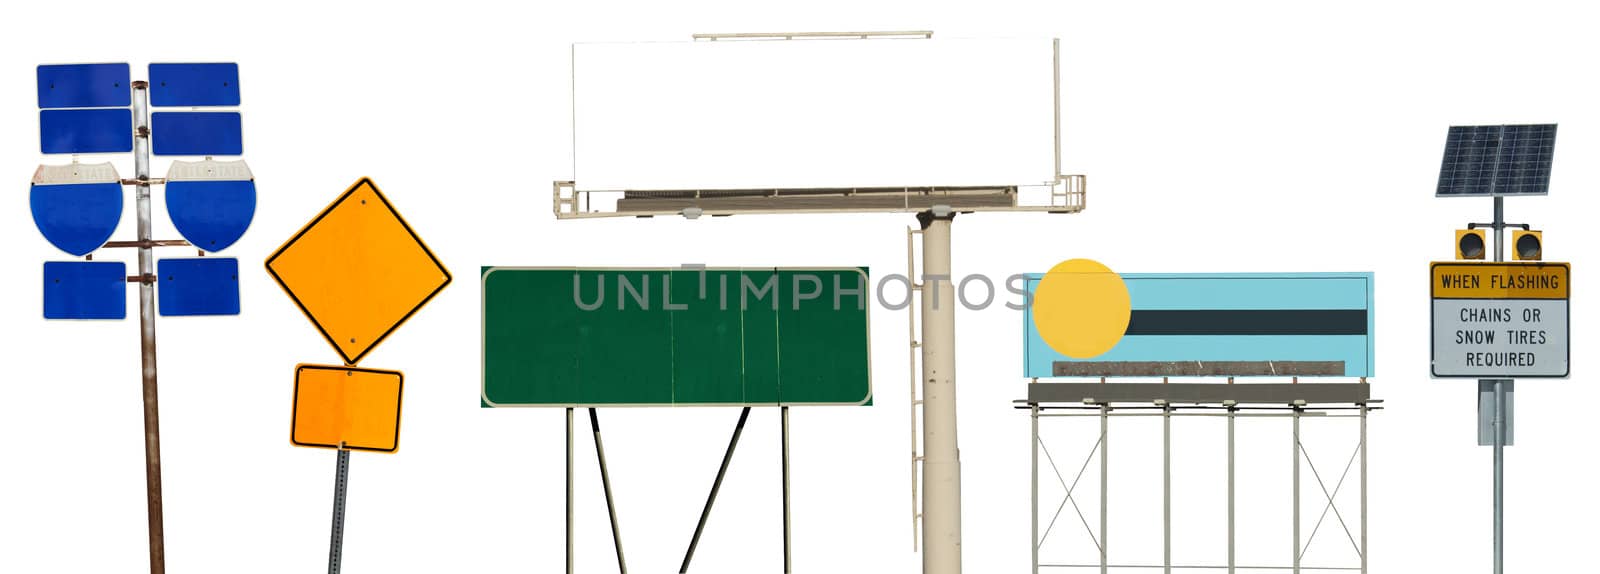 Blank blue interstate road signs